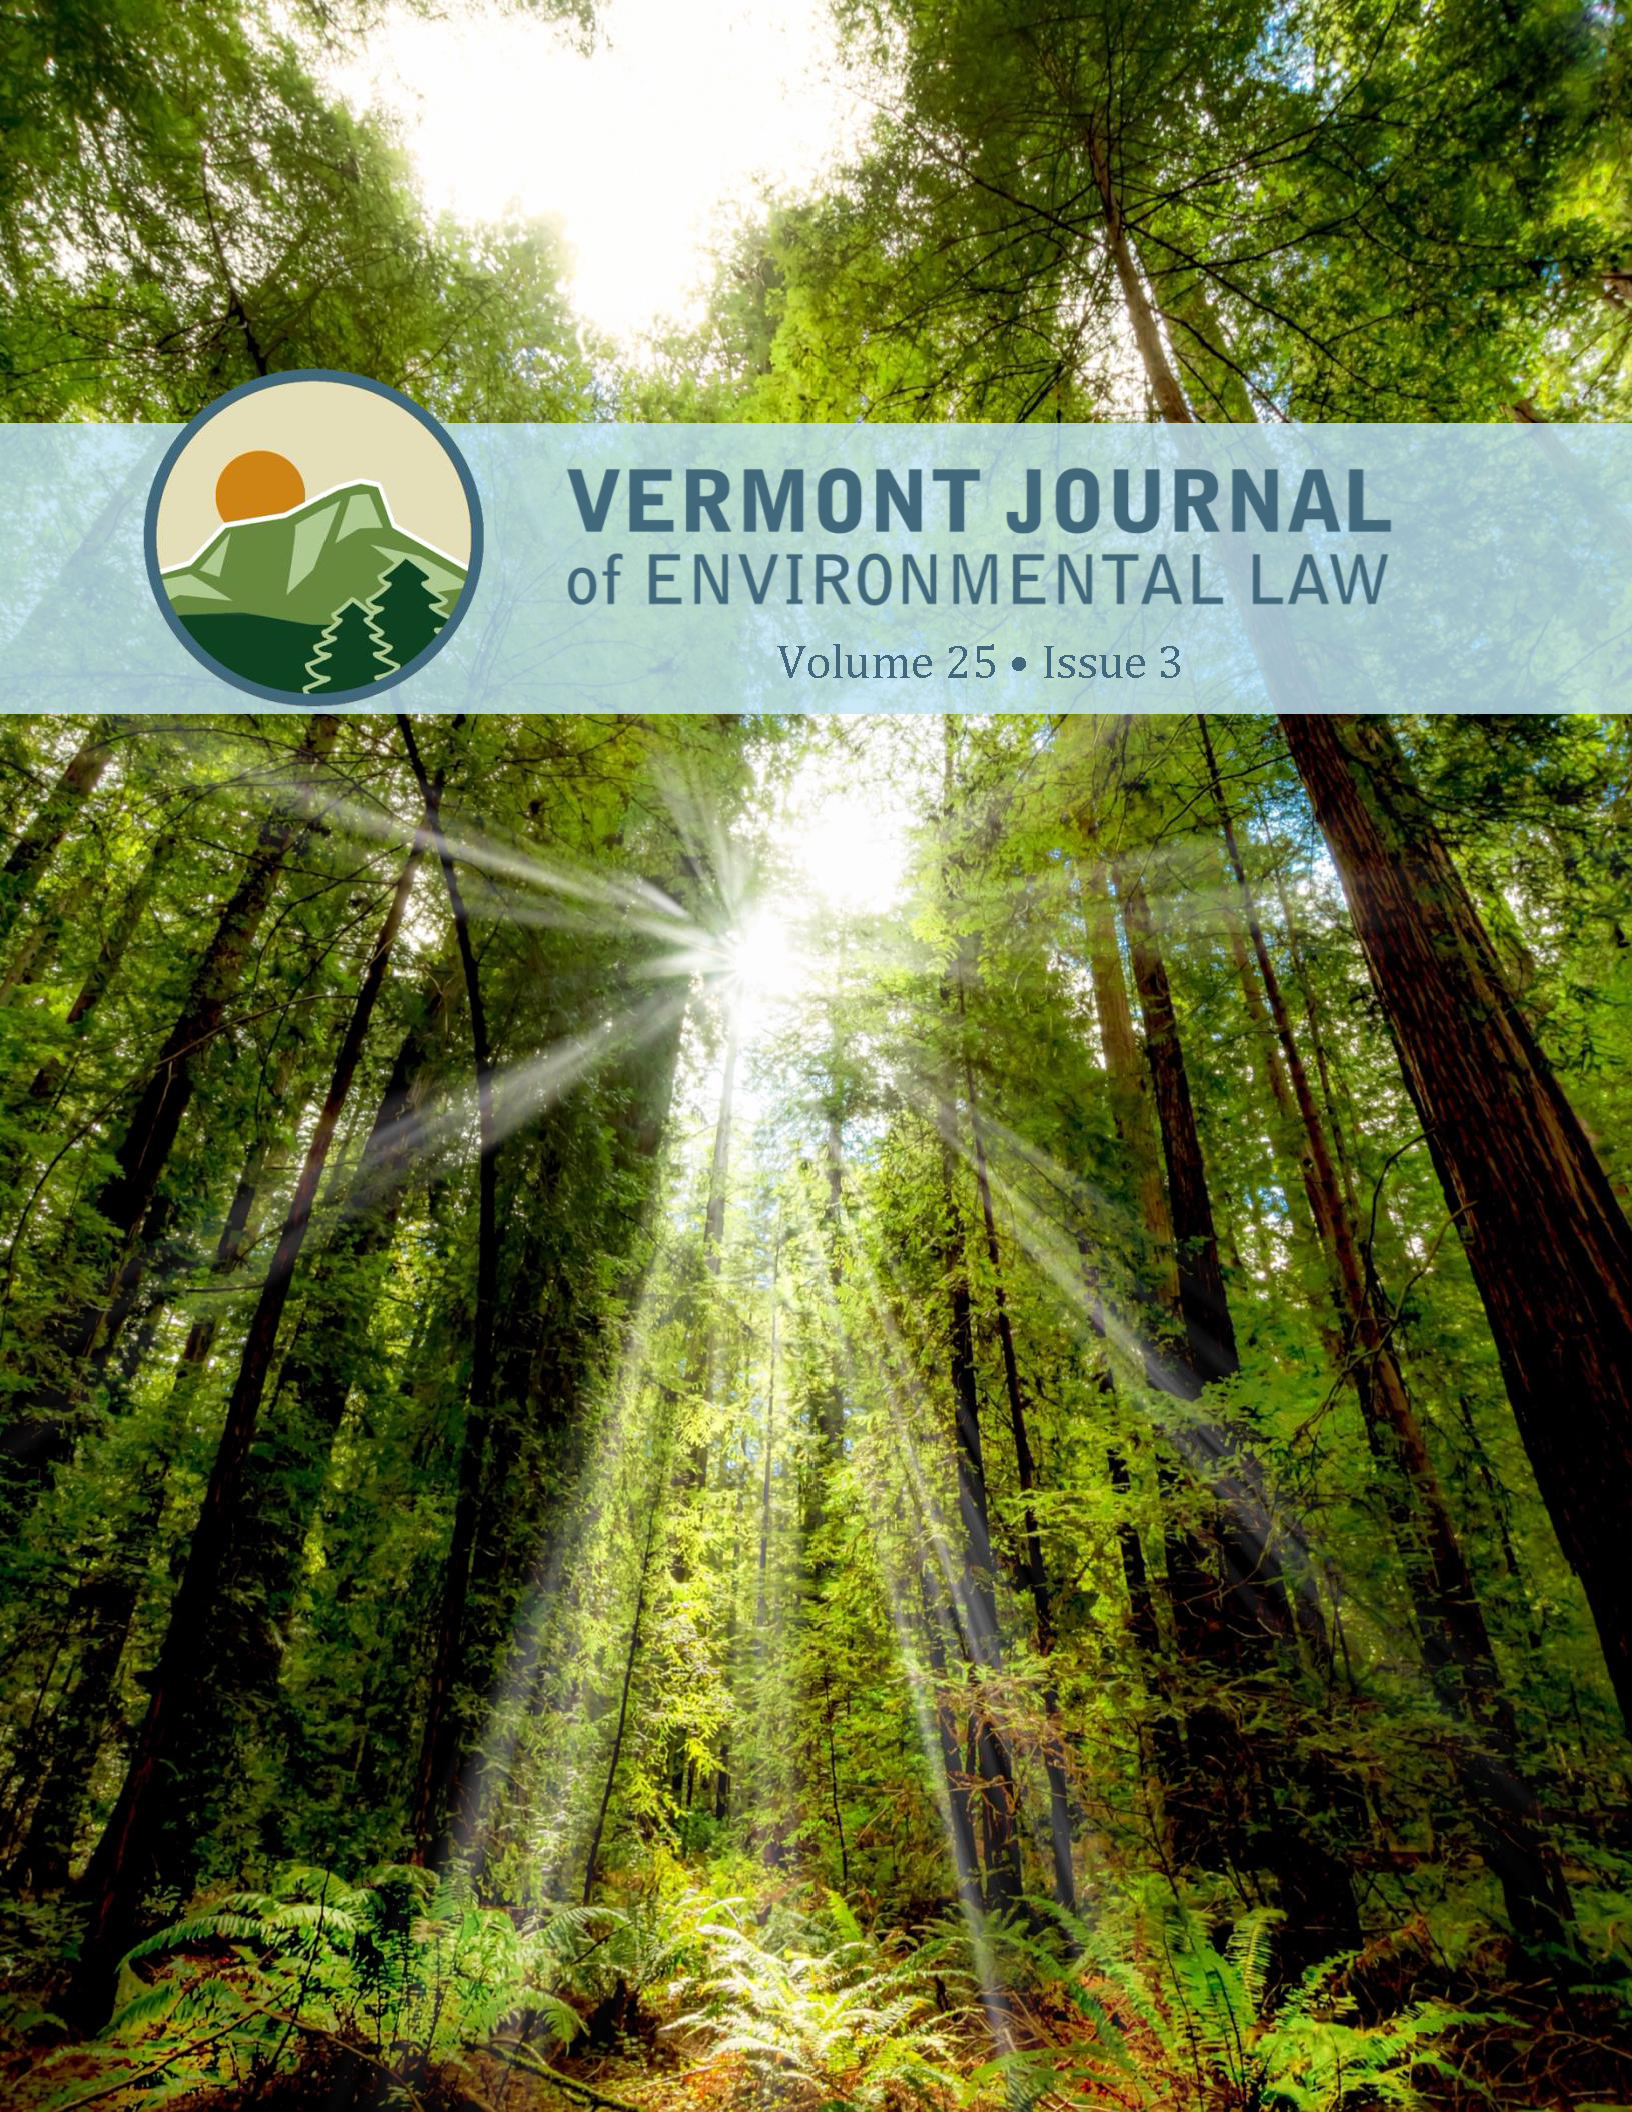 Published: Volume 25, Issue 3 of the Vermont Journal of Environmental Law